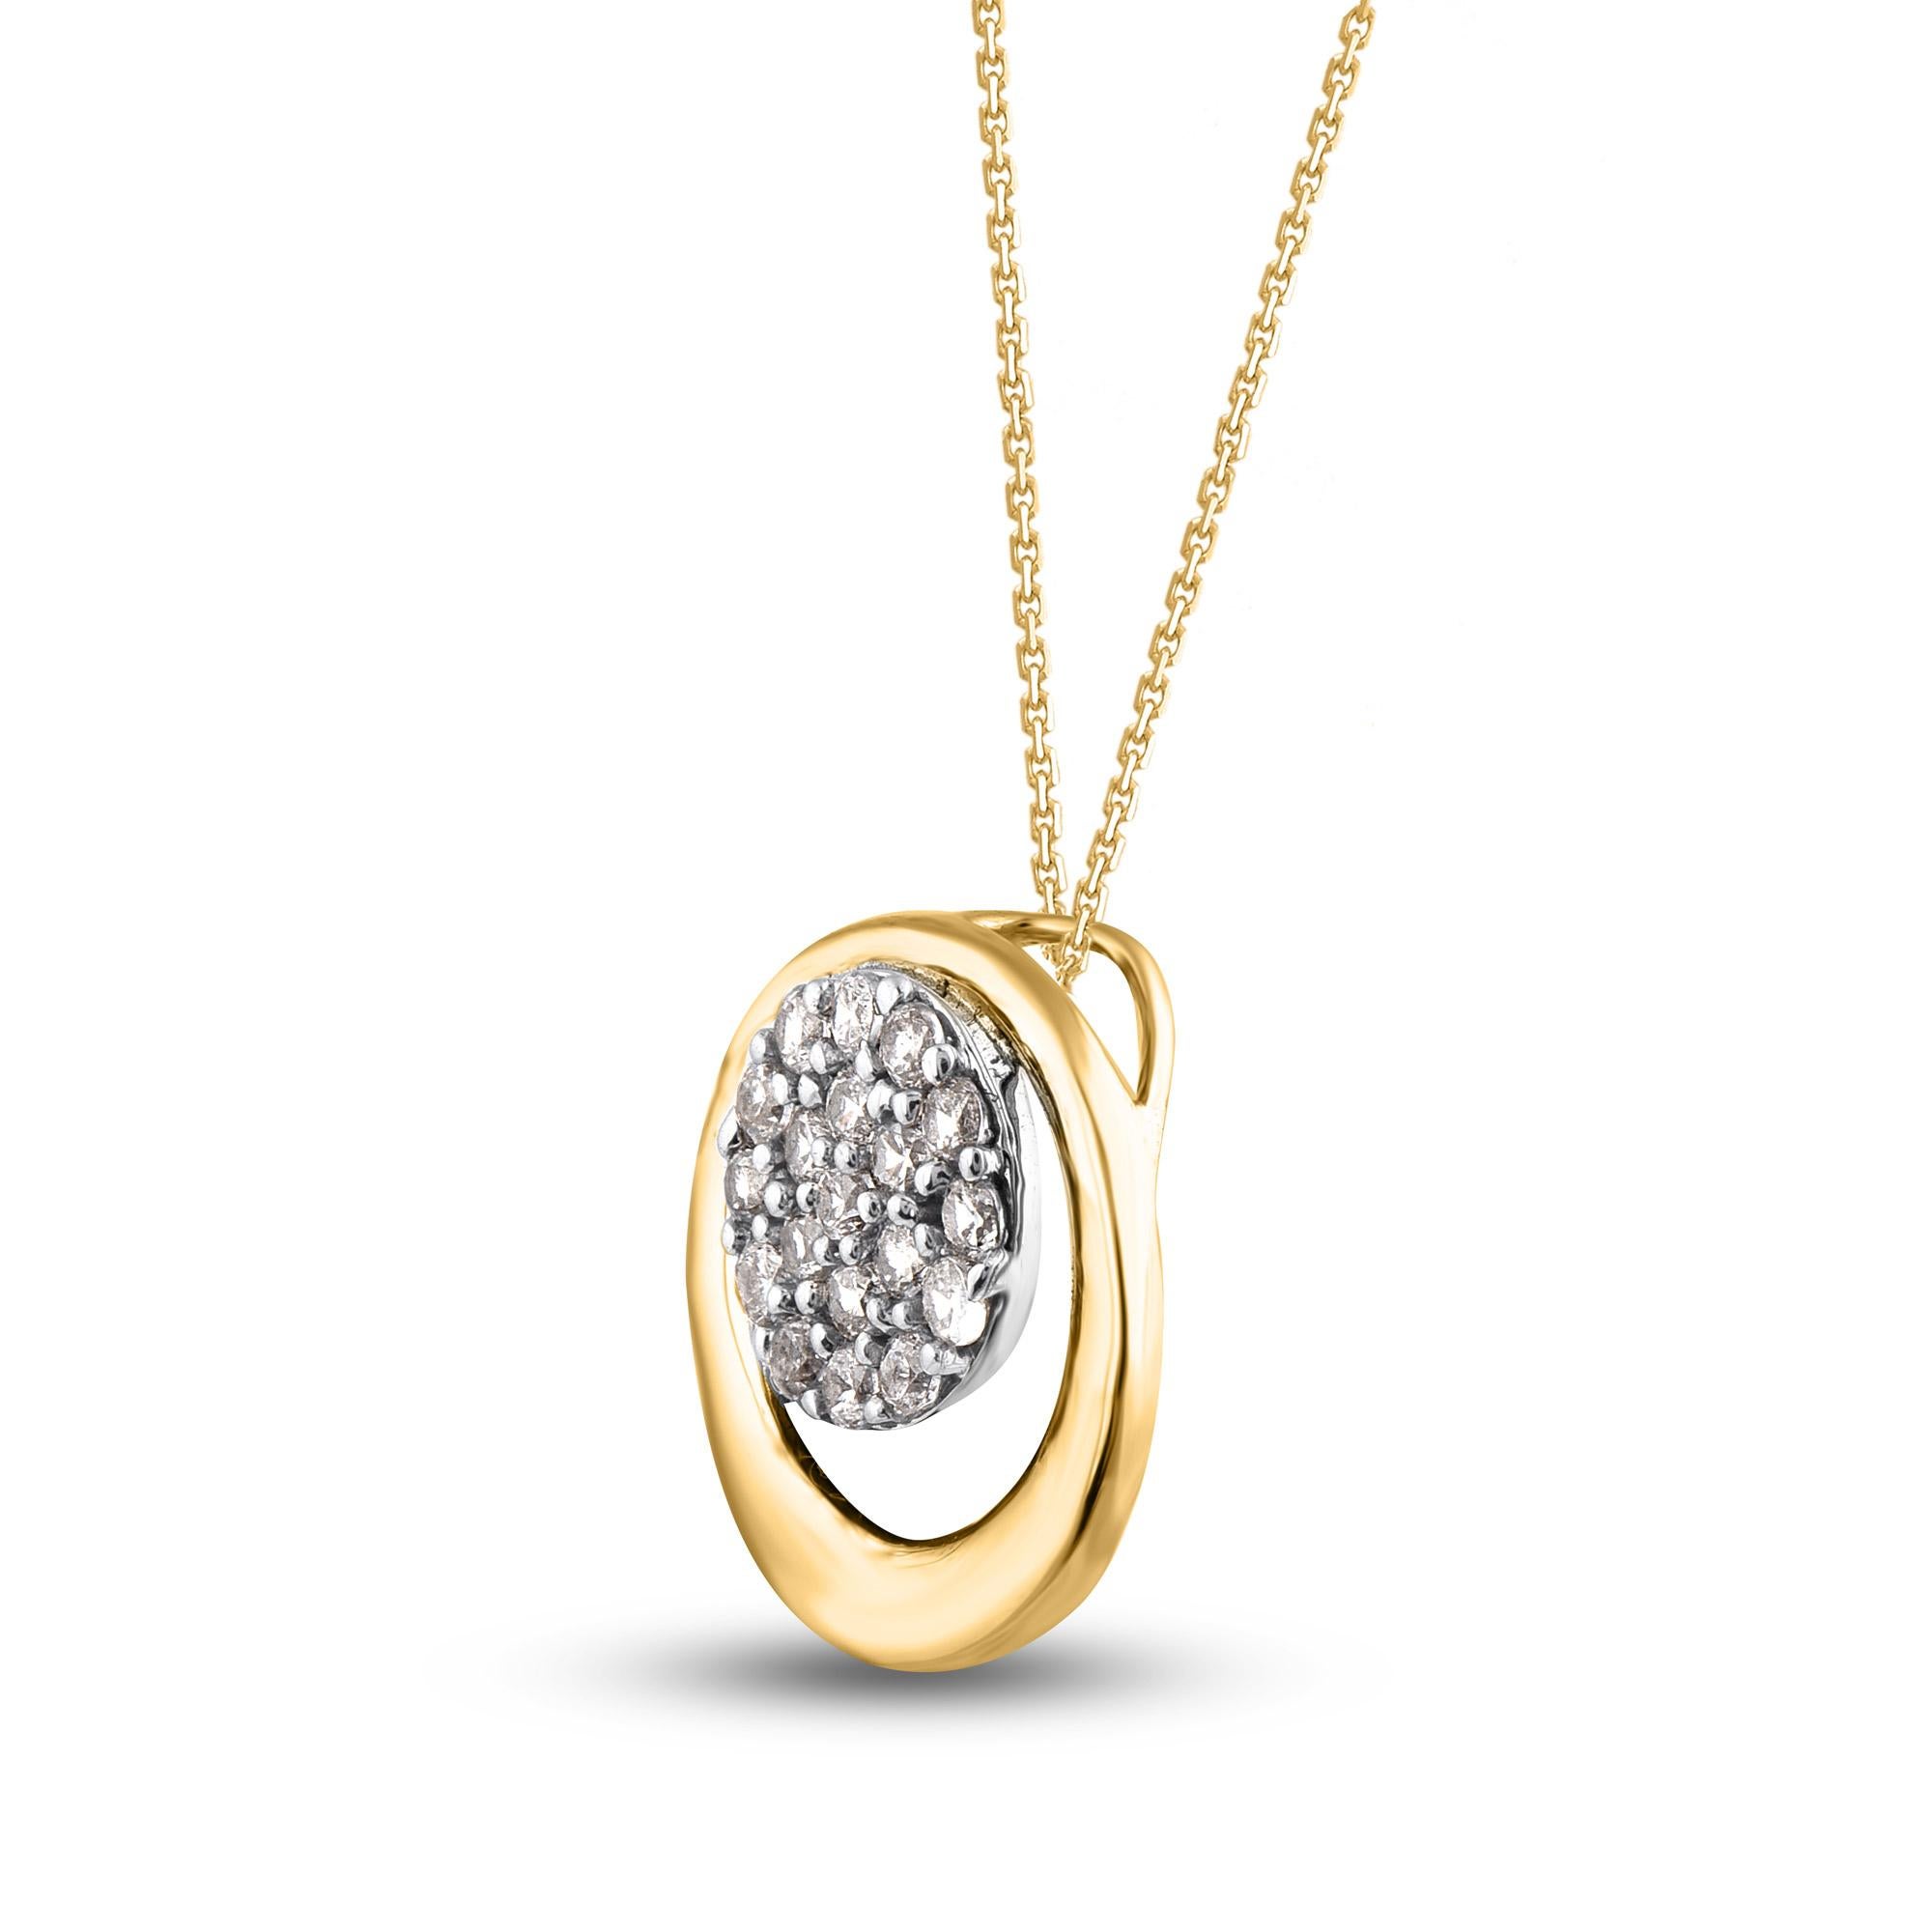 A striking addition when worn on its own, this diamond pendant makes a stunning impression. The pendant is crafted from 14-karat gold in your choice of white, rose, or yellow, and features round brilliant cut 19 white diamonds pave set, H-I color I2